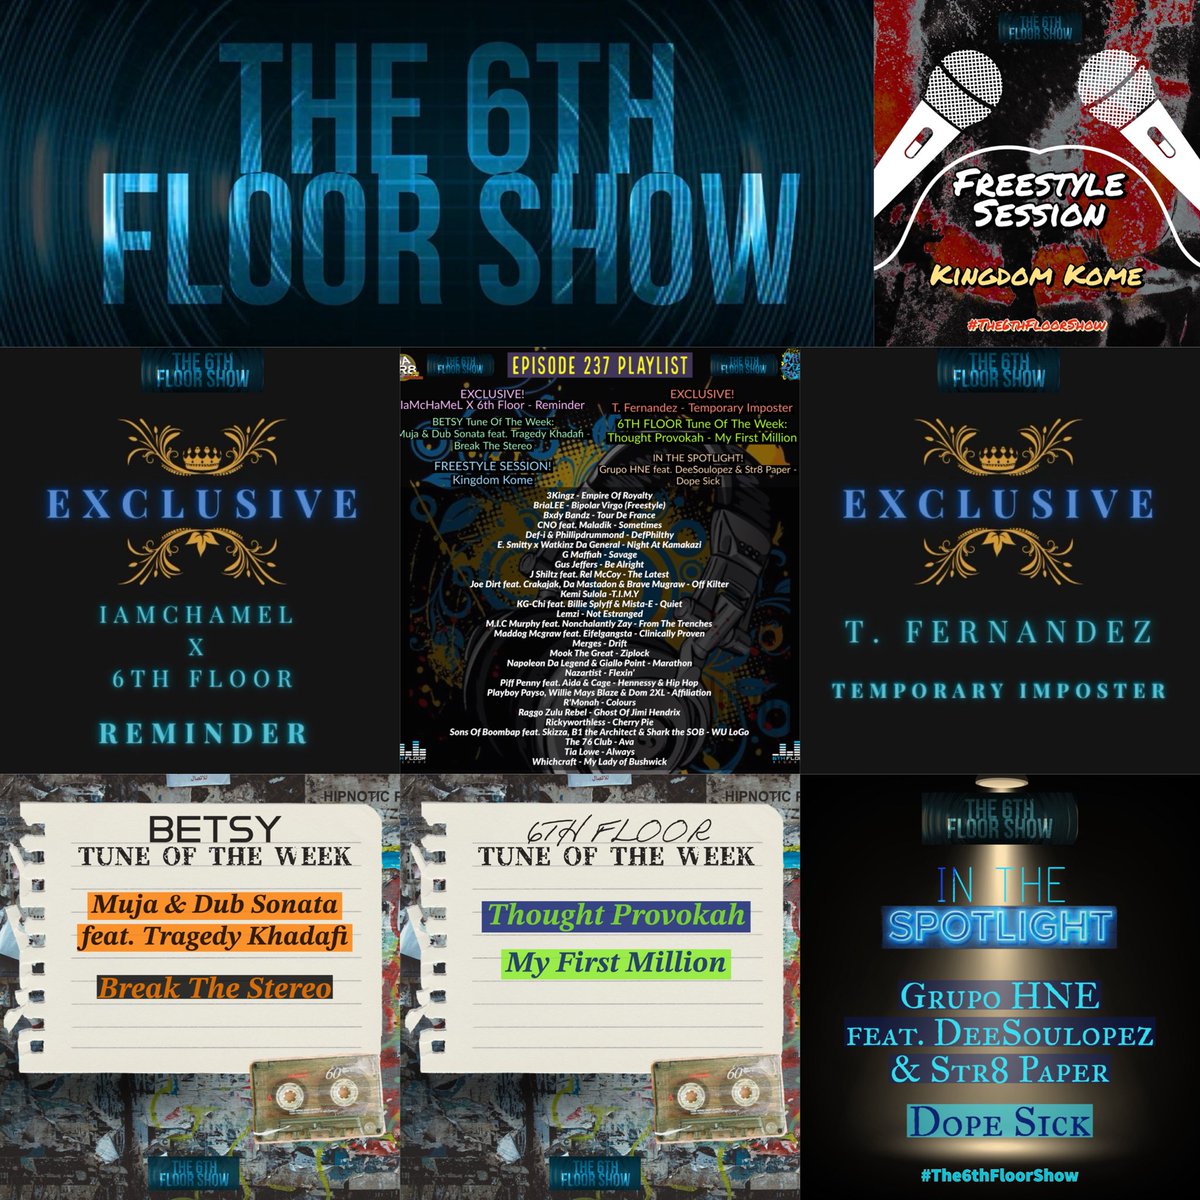 Episode 237 available now playing the best unsigned music from around the world 🌍 #The6thFloorShow The Home Of Independent Music podcasts.apple.com/gb/podcast/the… music.amazon.co.uk/podcasts/cde4a… mediafire.com/file/goau4wlab… audiomack.com/the-6th-floor-… deezer.page.link/4b6nB9dxpuP8hp…